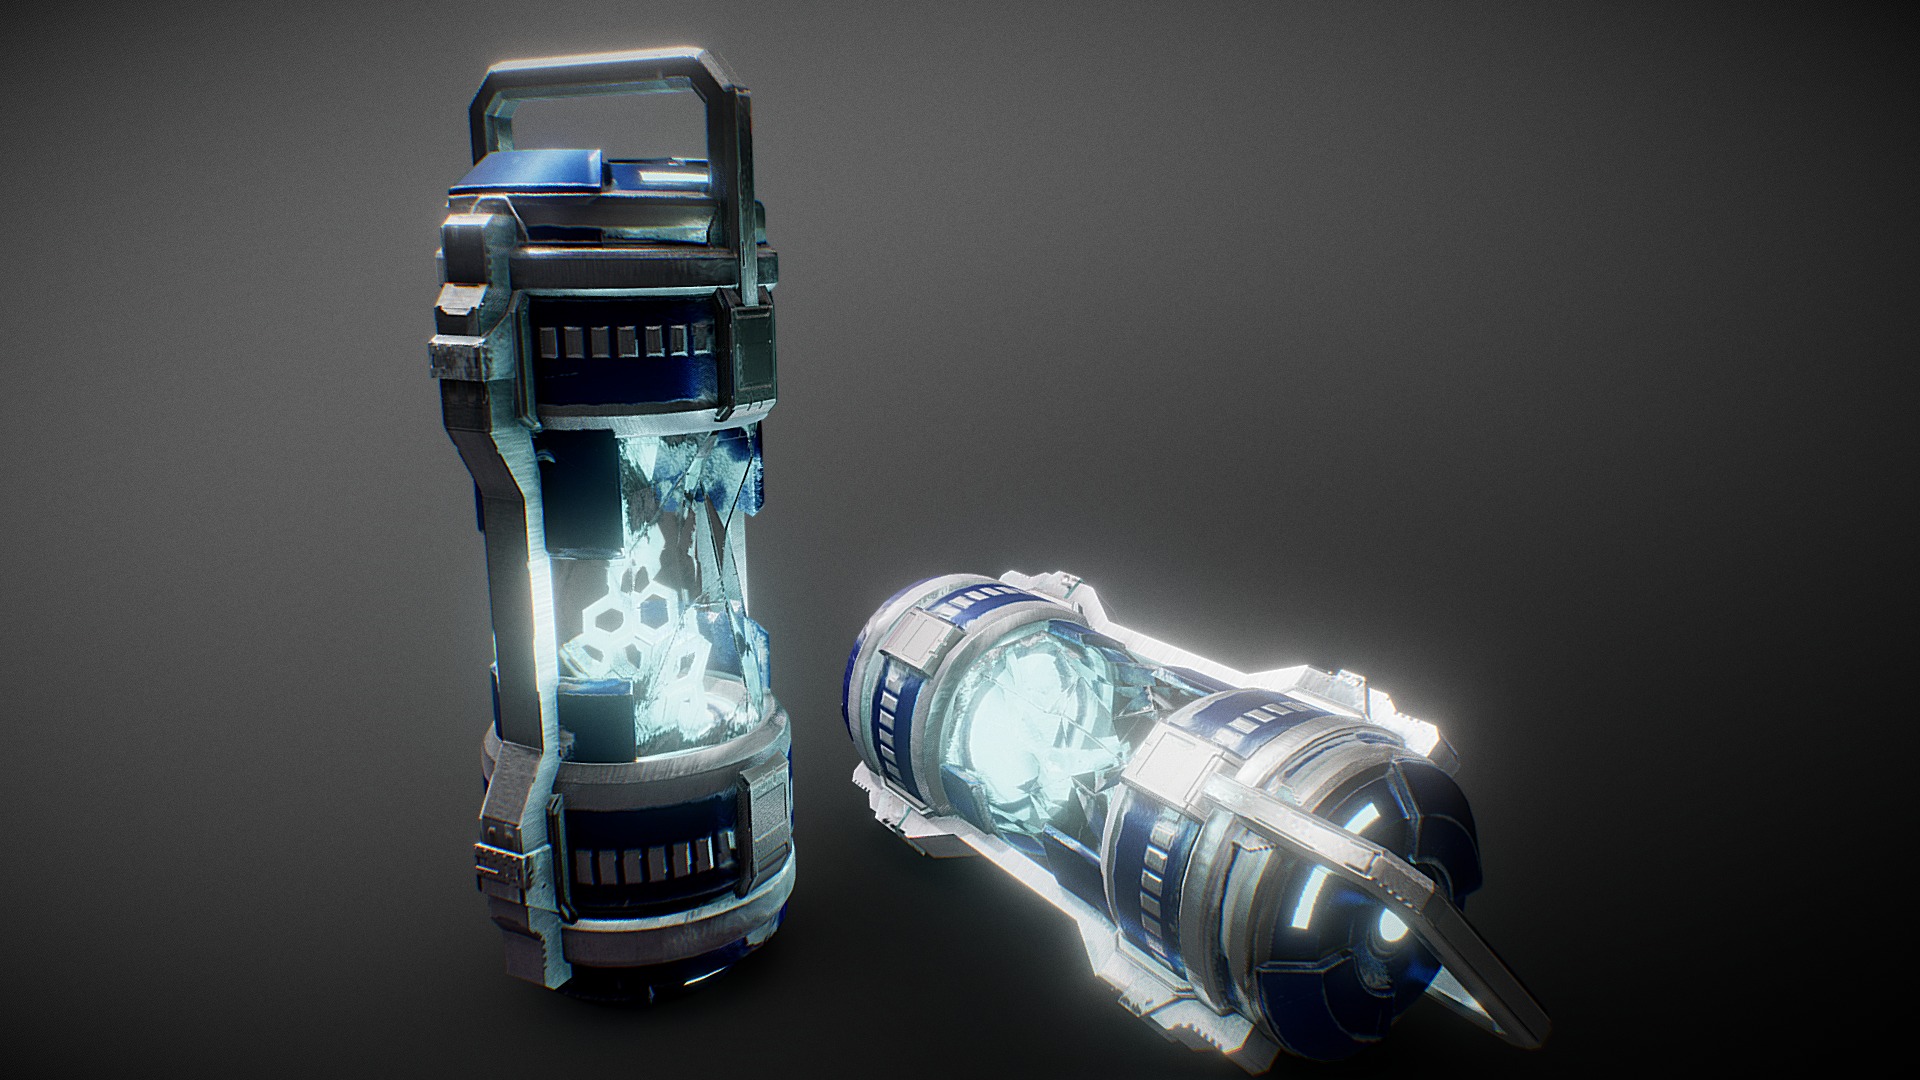 3D model Sci Fi Fuel Cells - This is a 3D model of the Sci Fi Fuel Cells. The 3D model is about a couple of blue and silver robot toys.